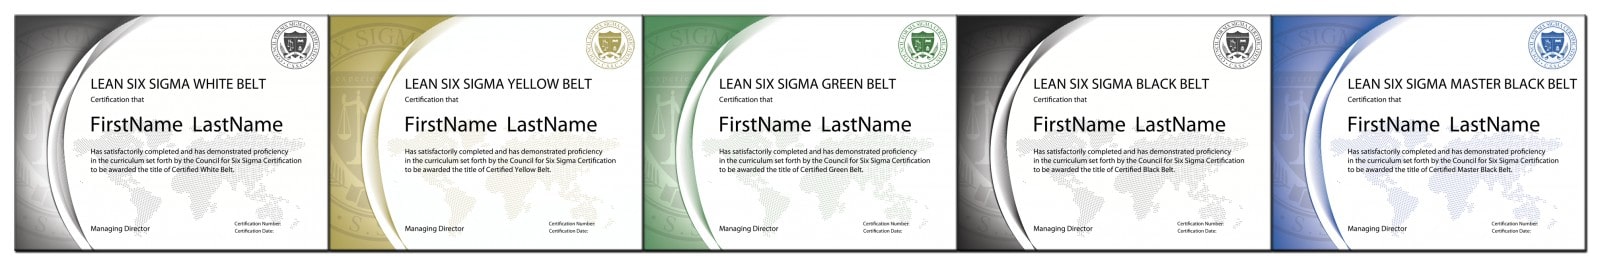 The Council for Six Sigma Certification - Official Industry Standard